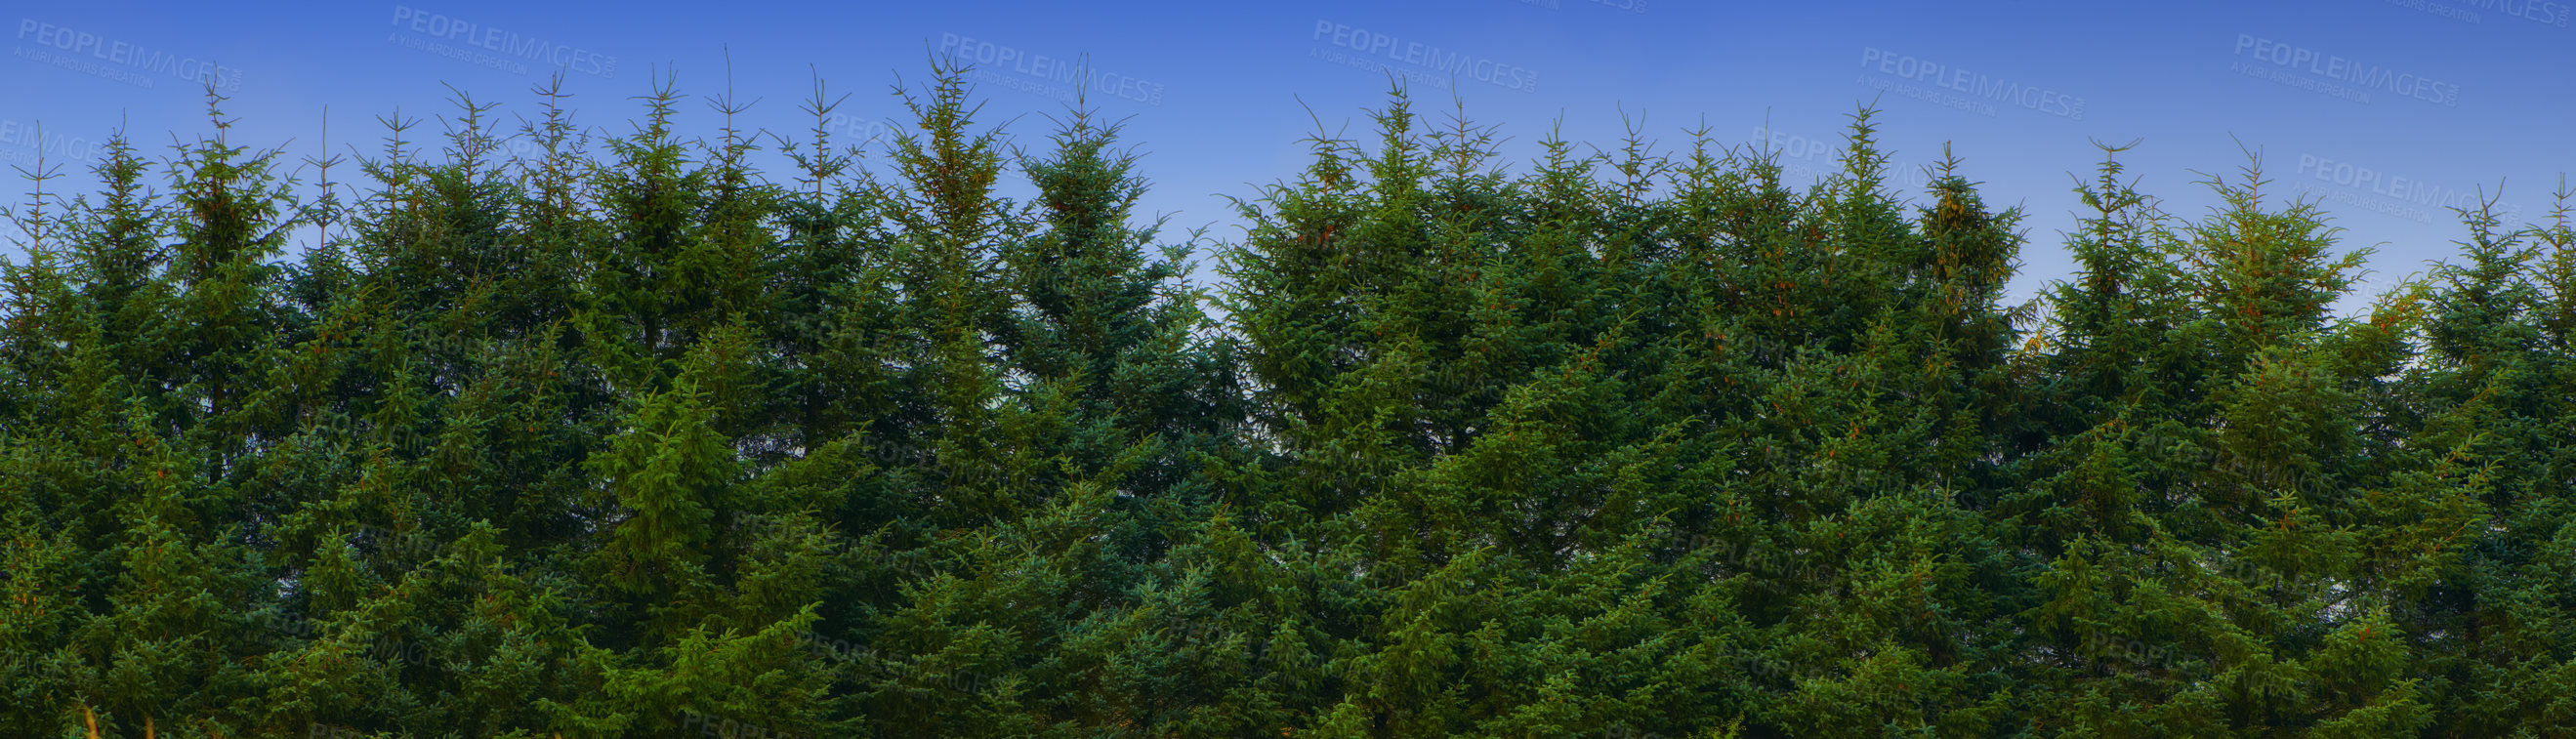 Buy stock photo Landscape view of wild fir, cedar or pine trees growing against a dark blue sky in Germany. Green environmental nature conservation, coniferous forest in remote tourism destination for resin export